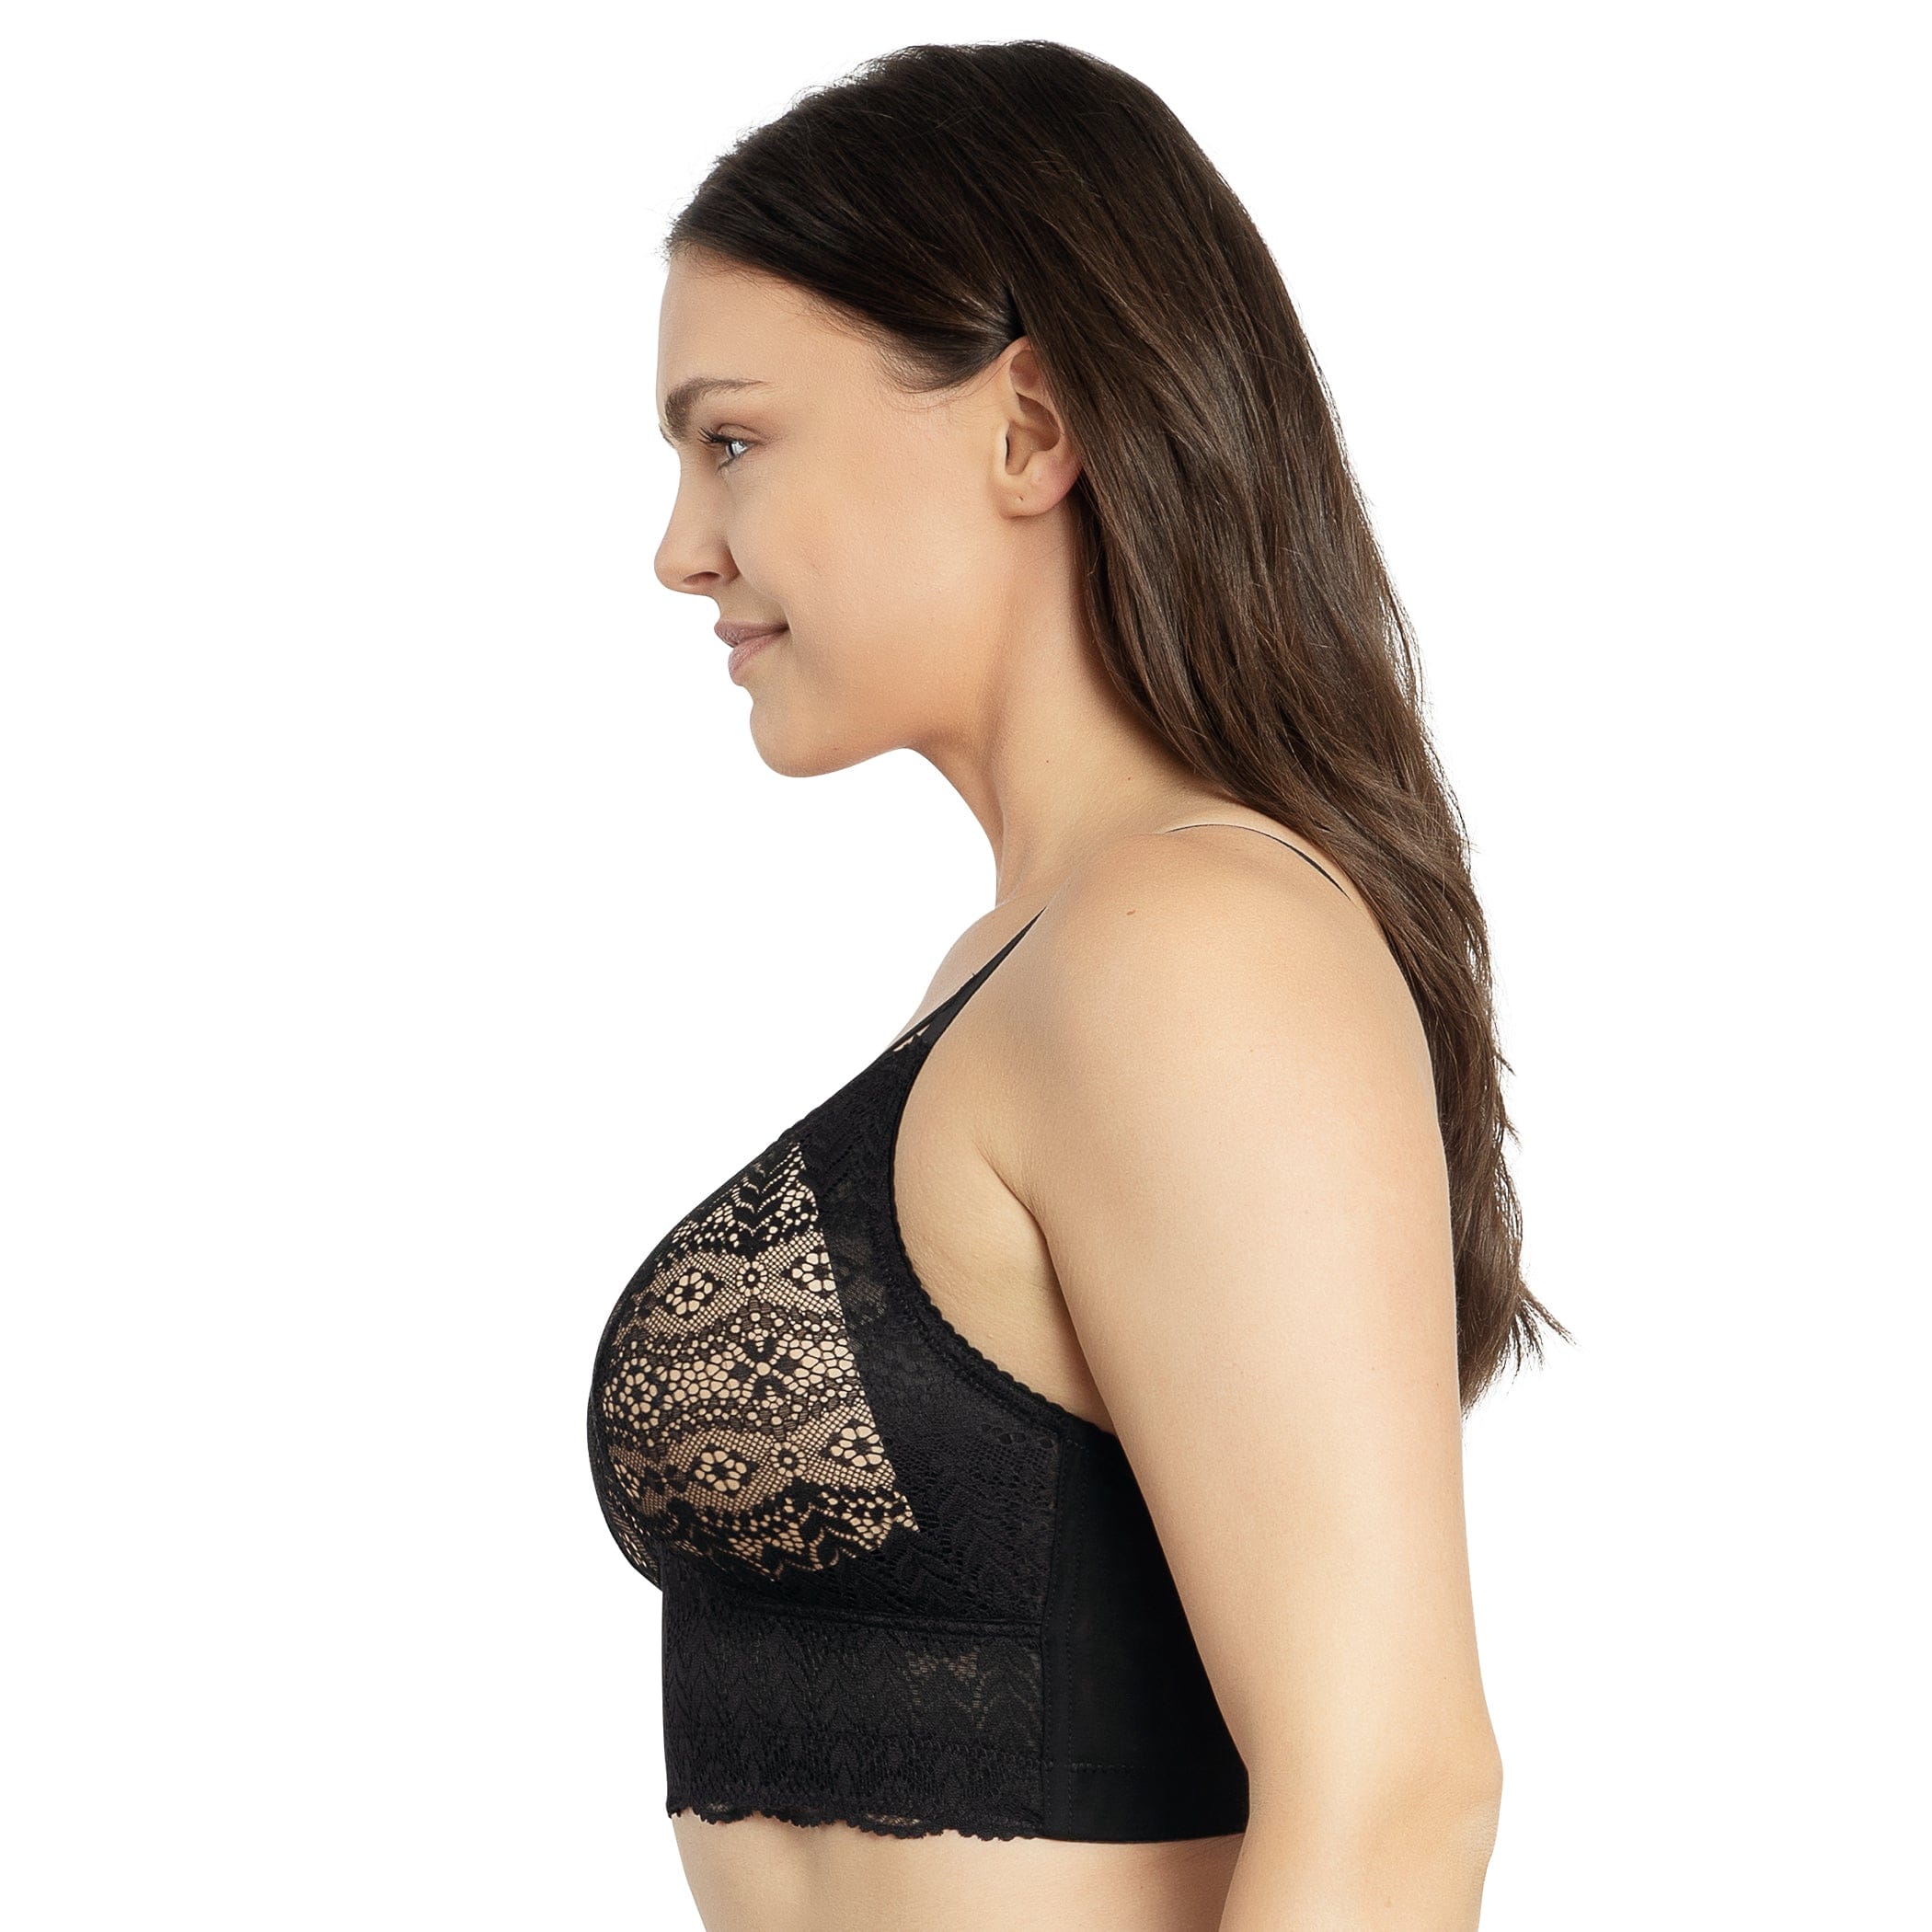 Padded Lace Bralette